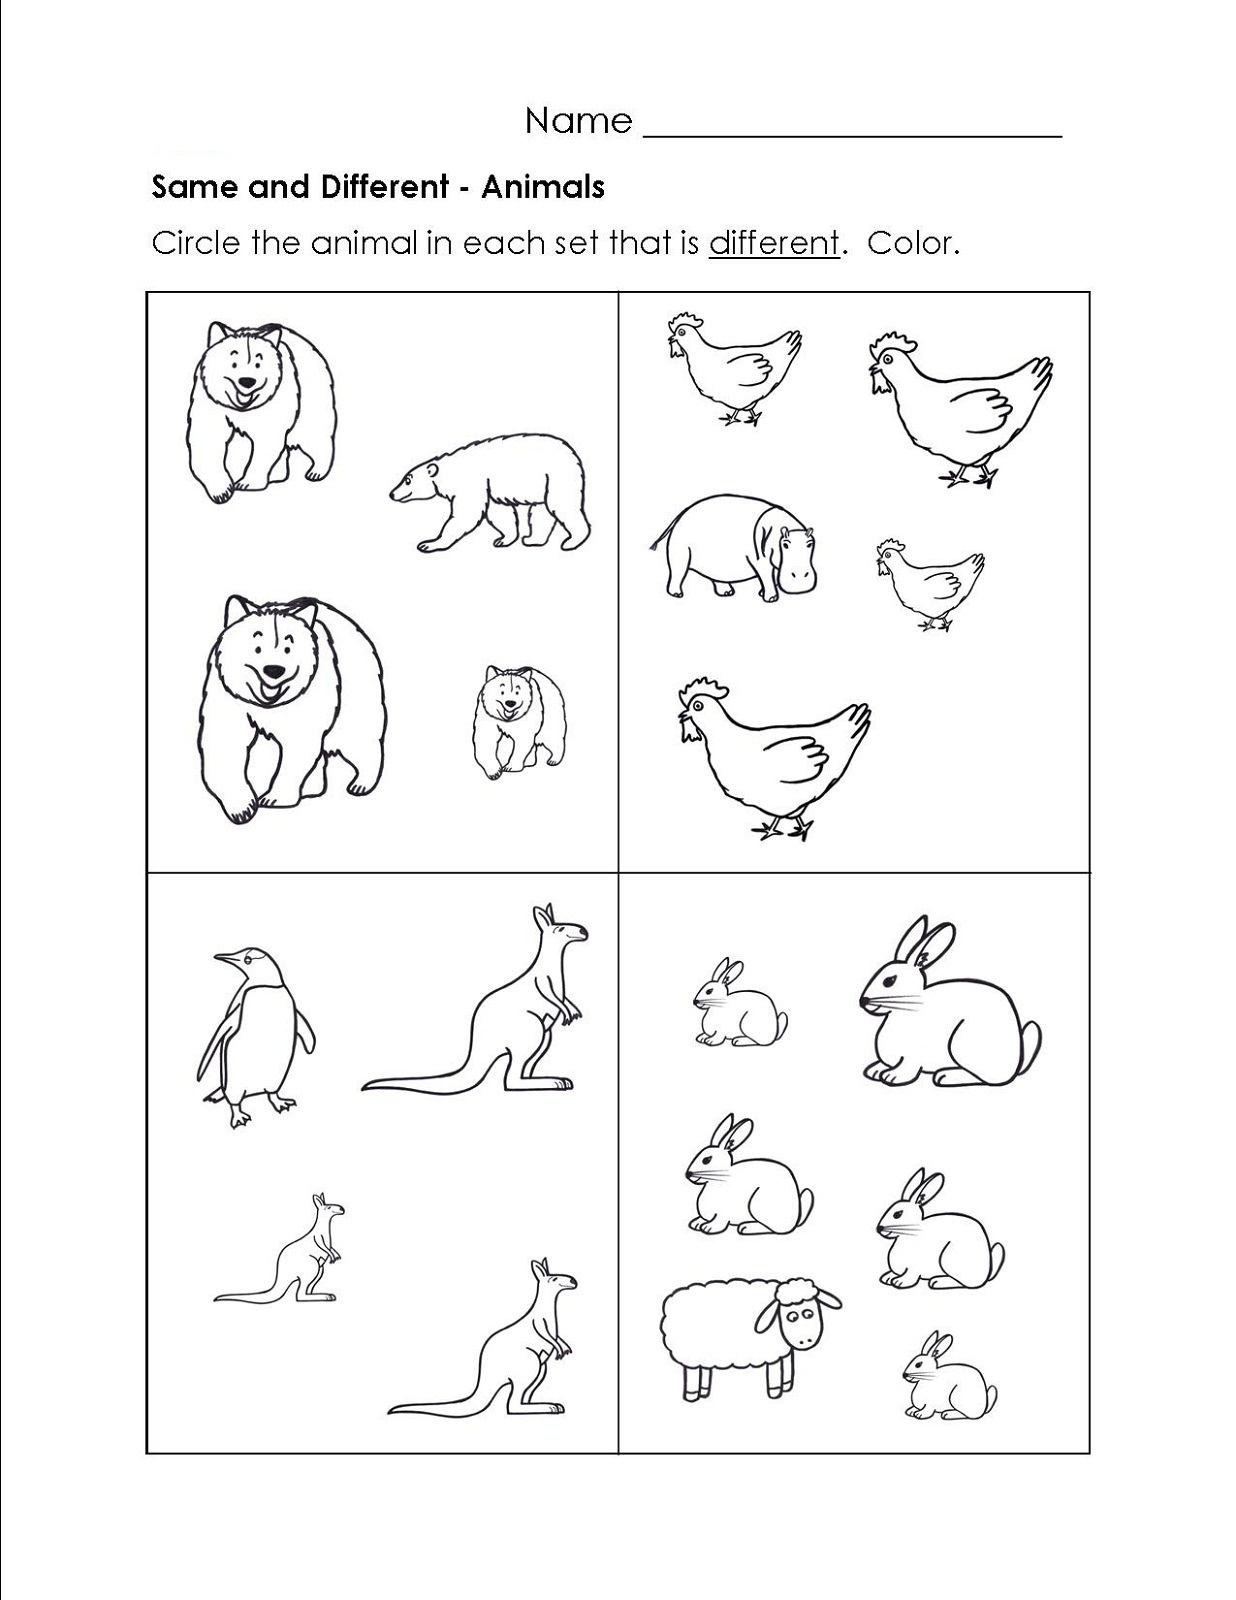 Same and Different Worksheets for Kids Activity Shelter